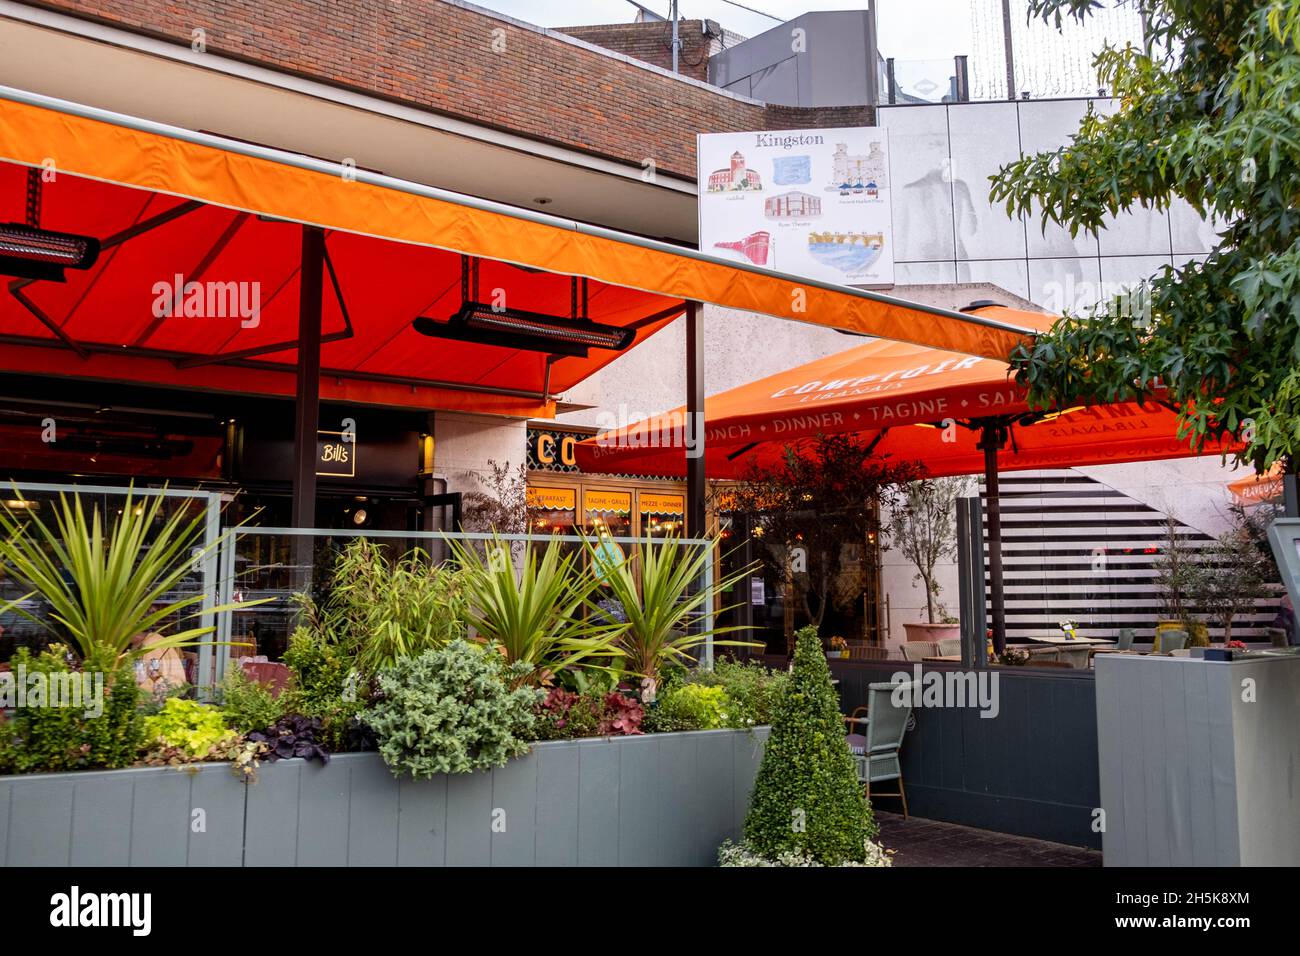 Kingston Upon Thames London England UK November 5 2021, Restaurant Open Air Terrace Eating Area With Orange Canopies And Heaters With No People Stock Photo